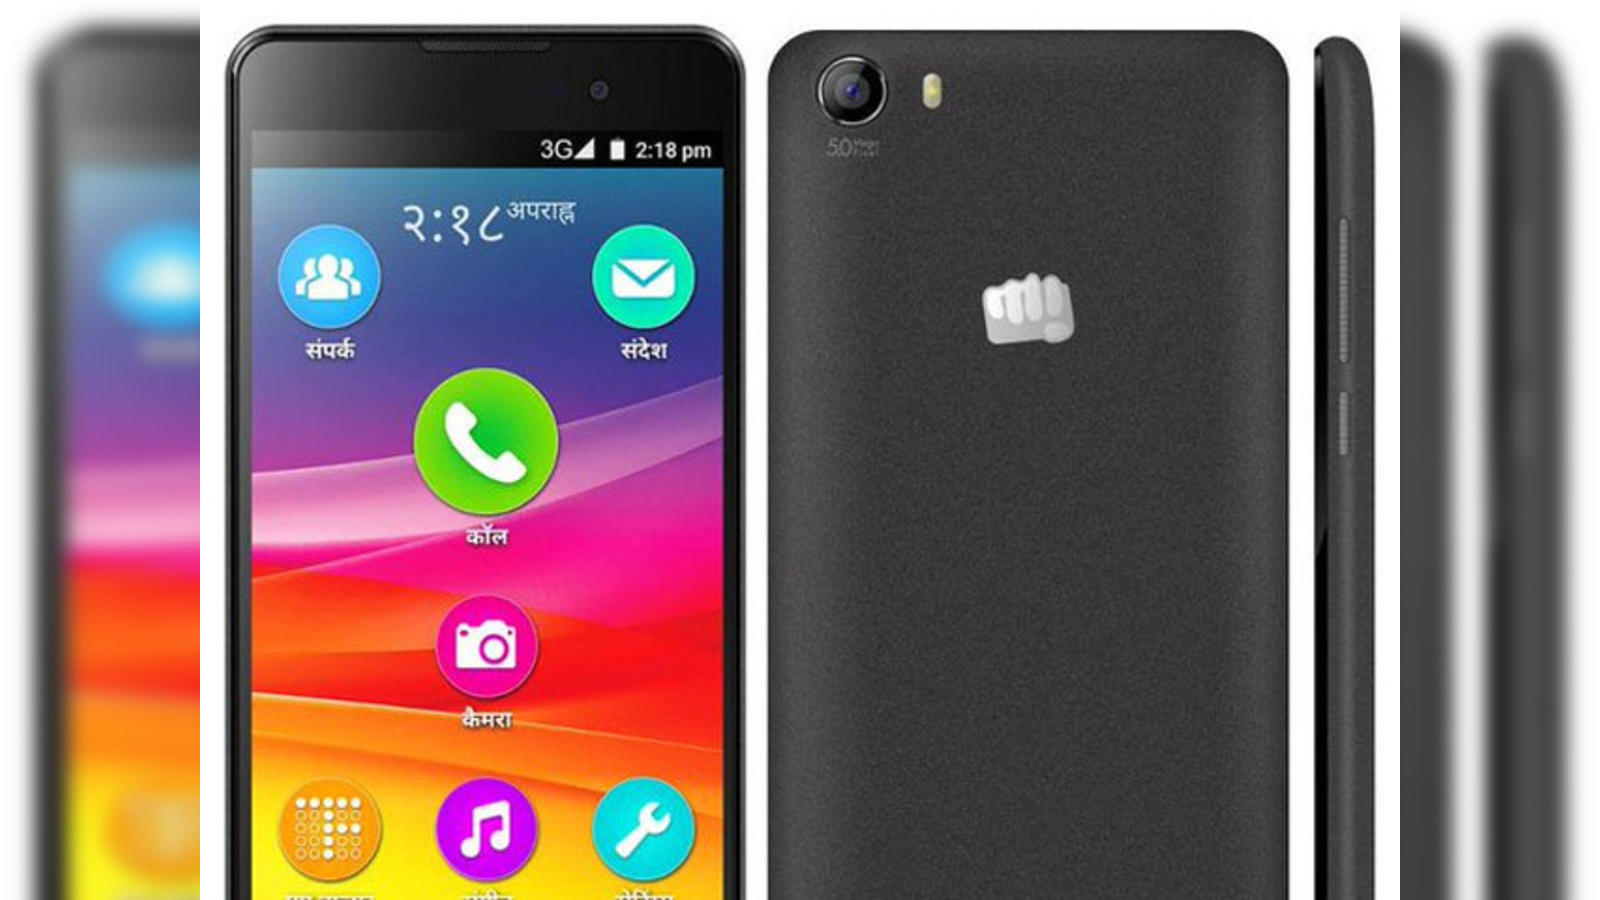 Micromax Bharat 1 V409 (512MB, 4GB, Champagne) in Sangrur at best price by  Jain Watch Company - Justdial